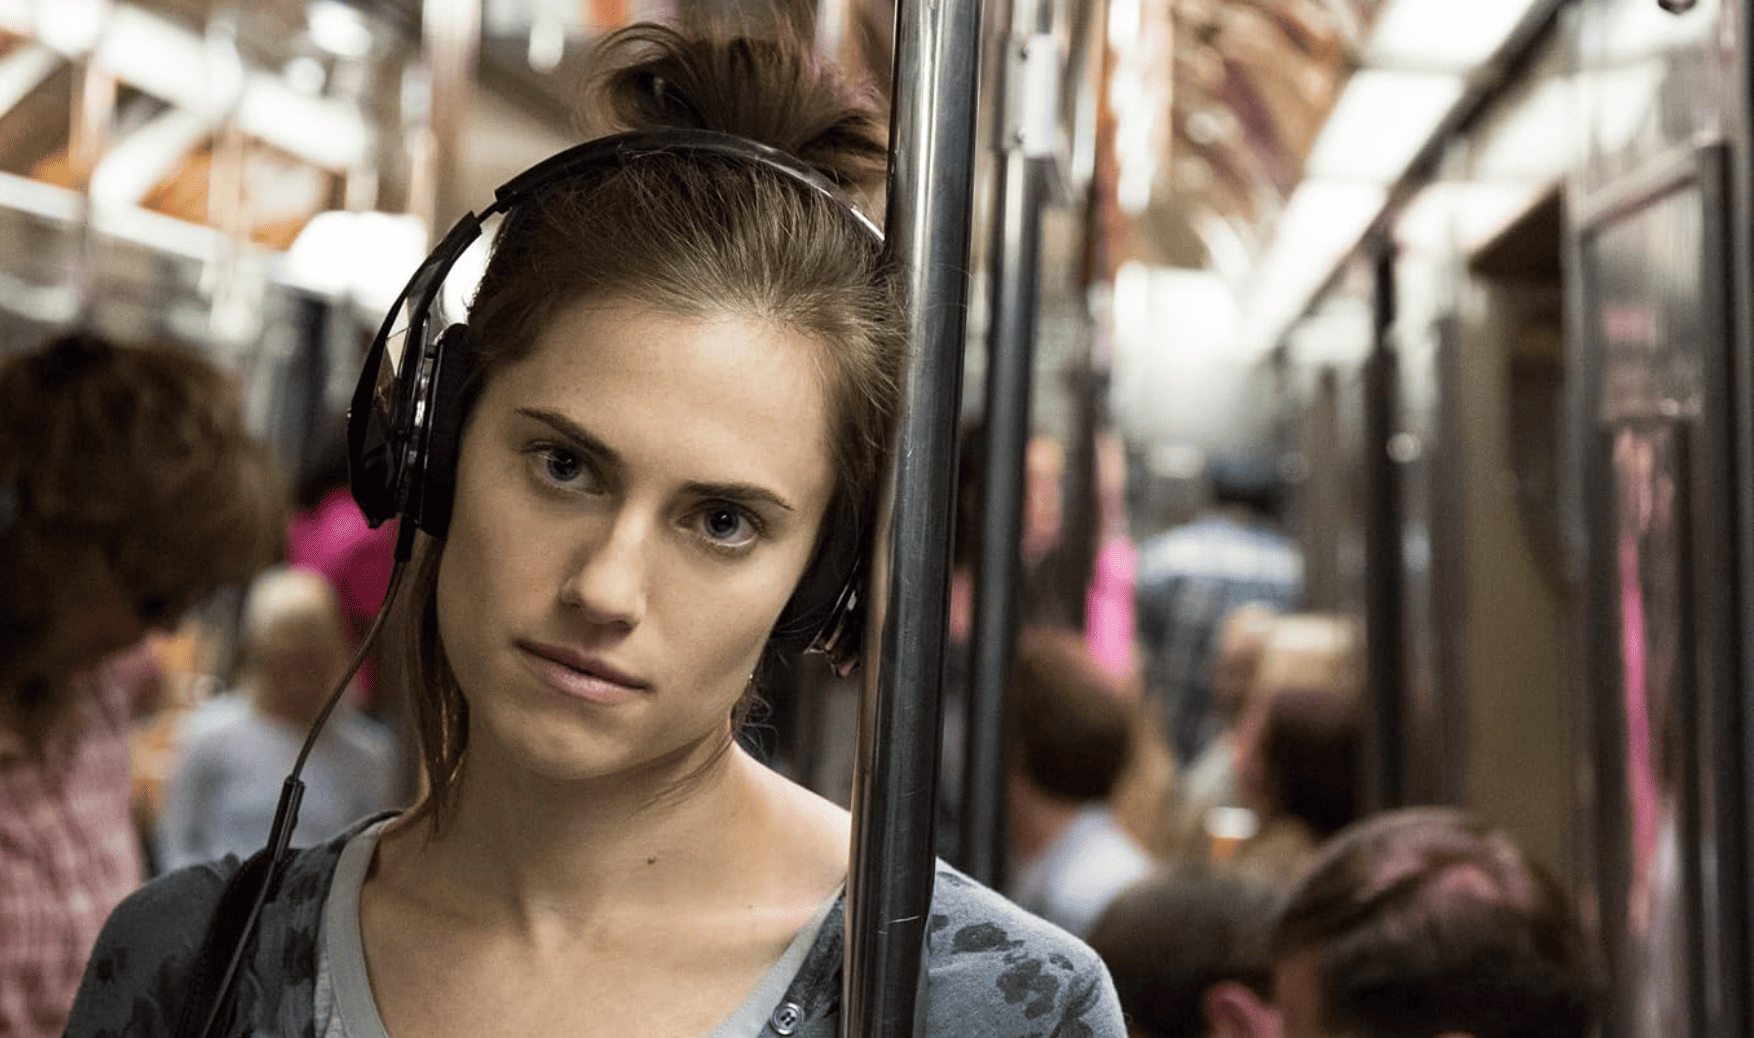 Marnie listens to some tunes while wearing her headphones on the subway in this image from Apatow Productions.